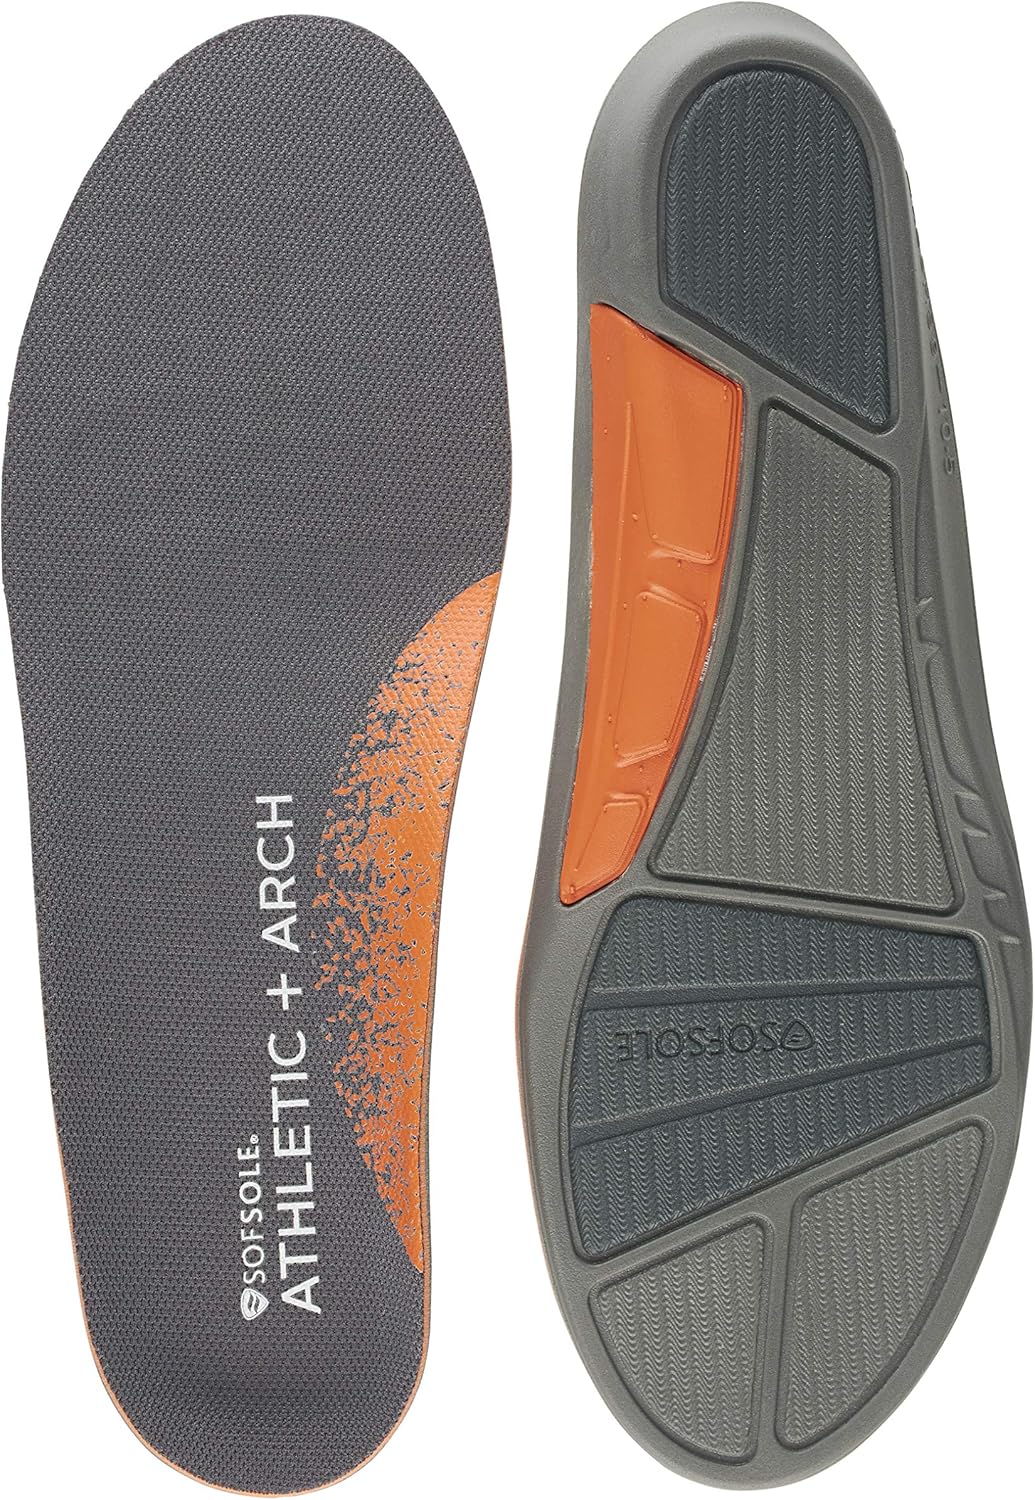 Sof Sole Women's Athletic High Arch Performance Full-Length Insole